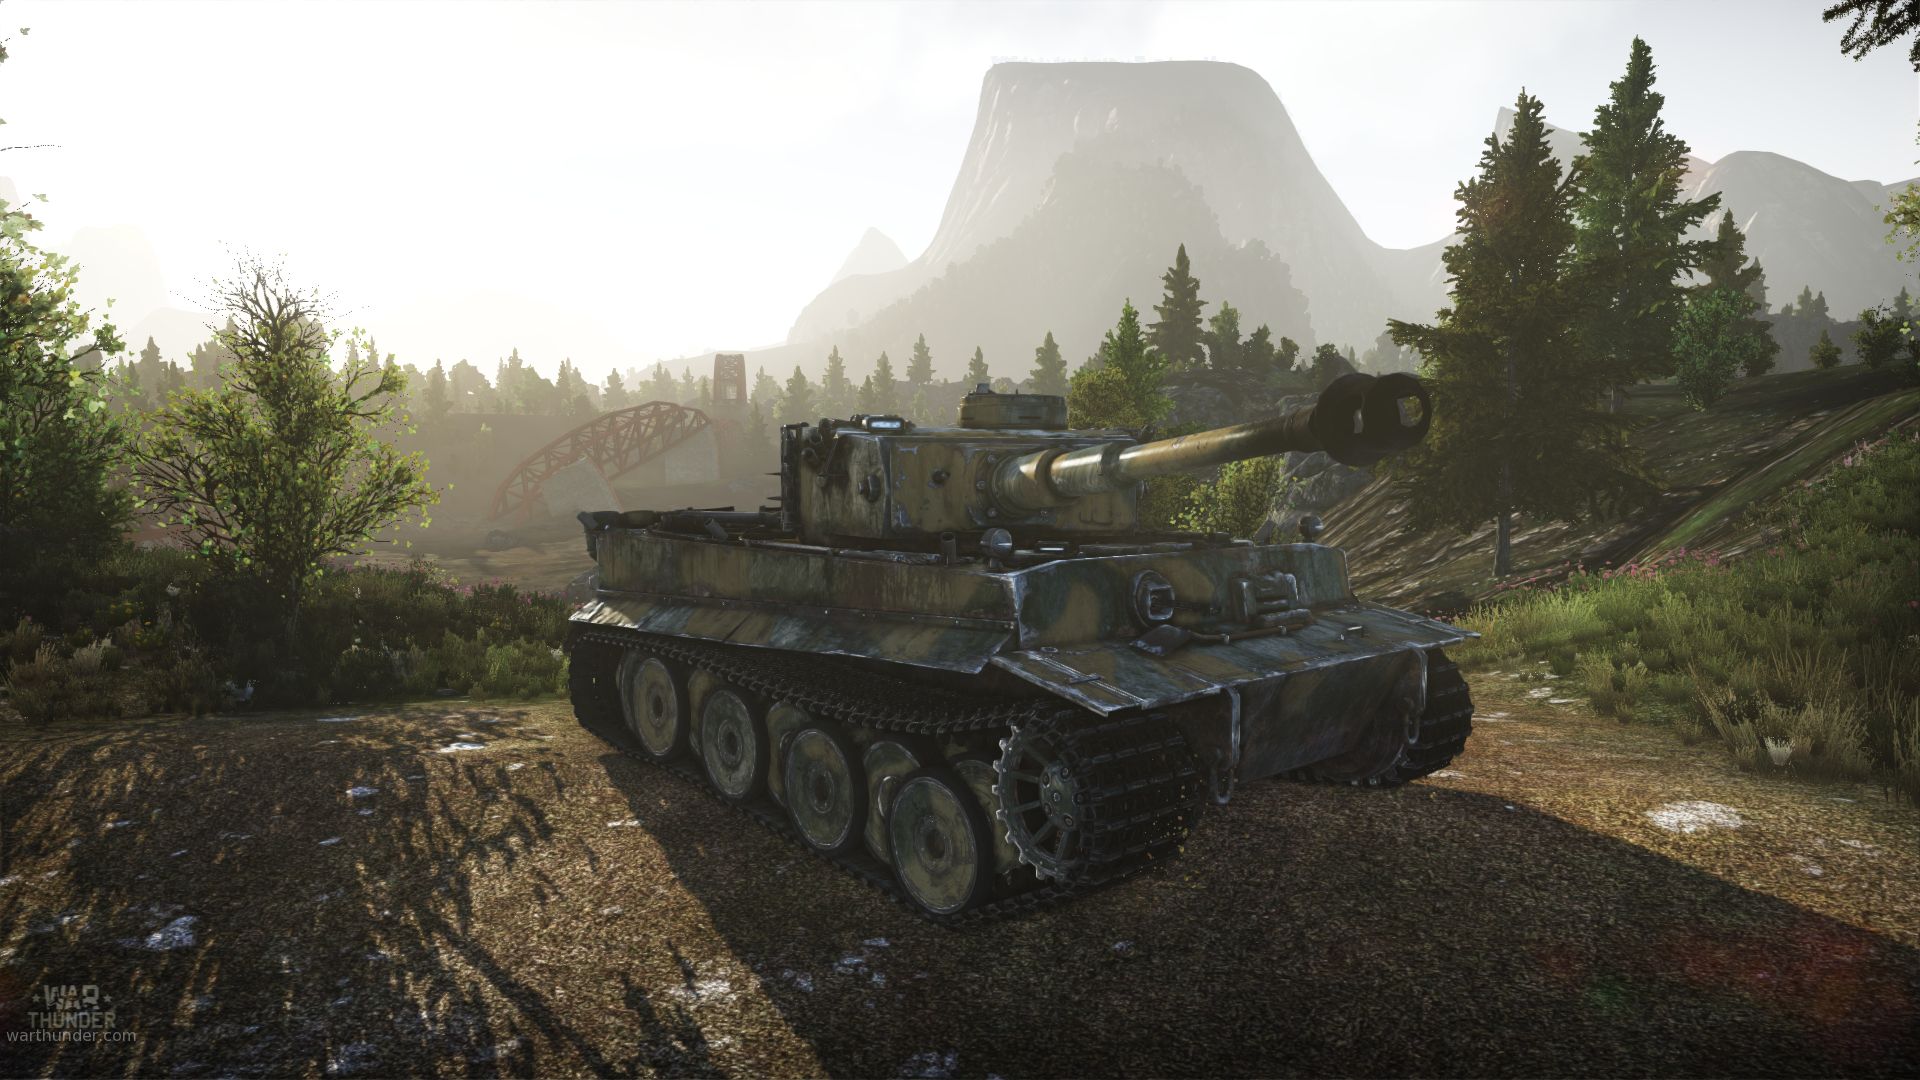 The mechanics of tank driving is geared towards realism